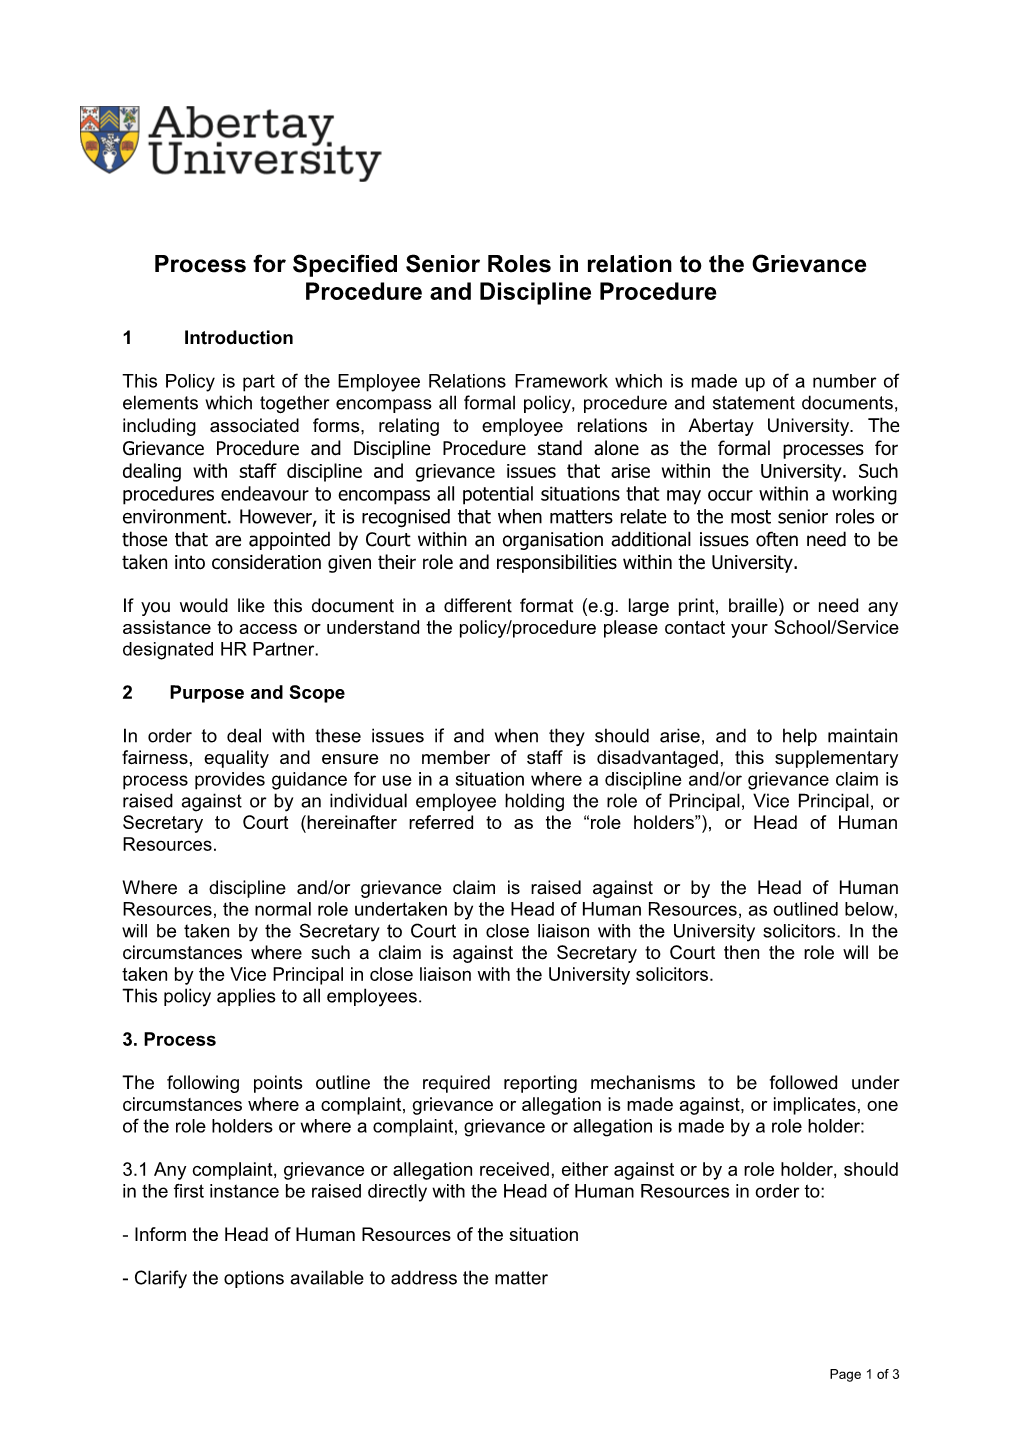 Process for Specified Senior Roles in Relation to the Grievance Procedure and Discipline